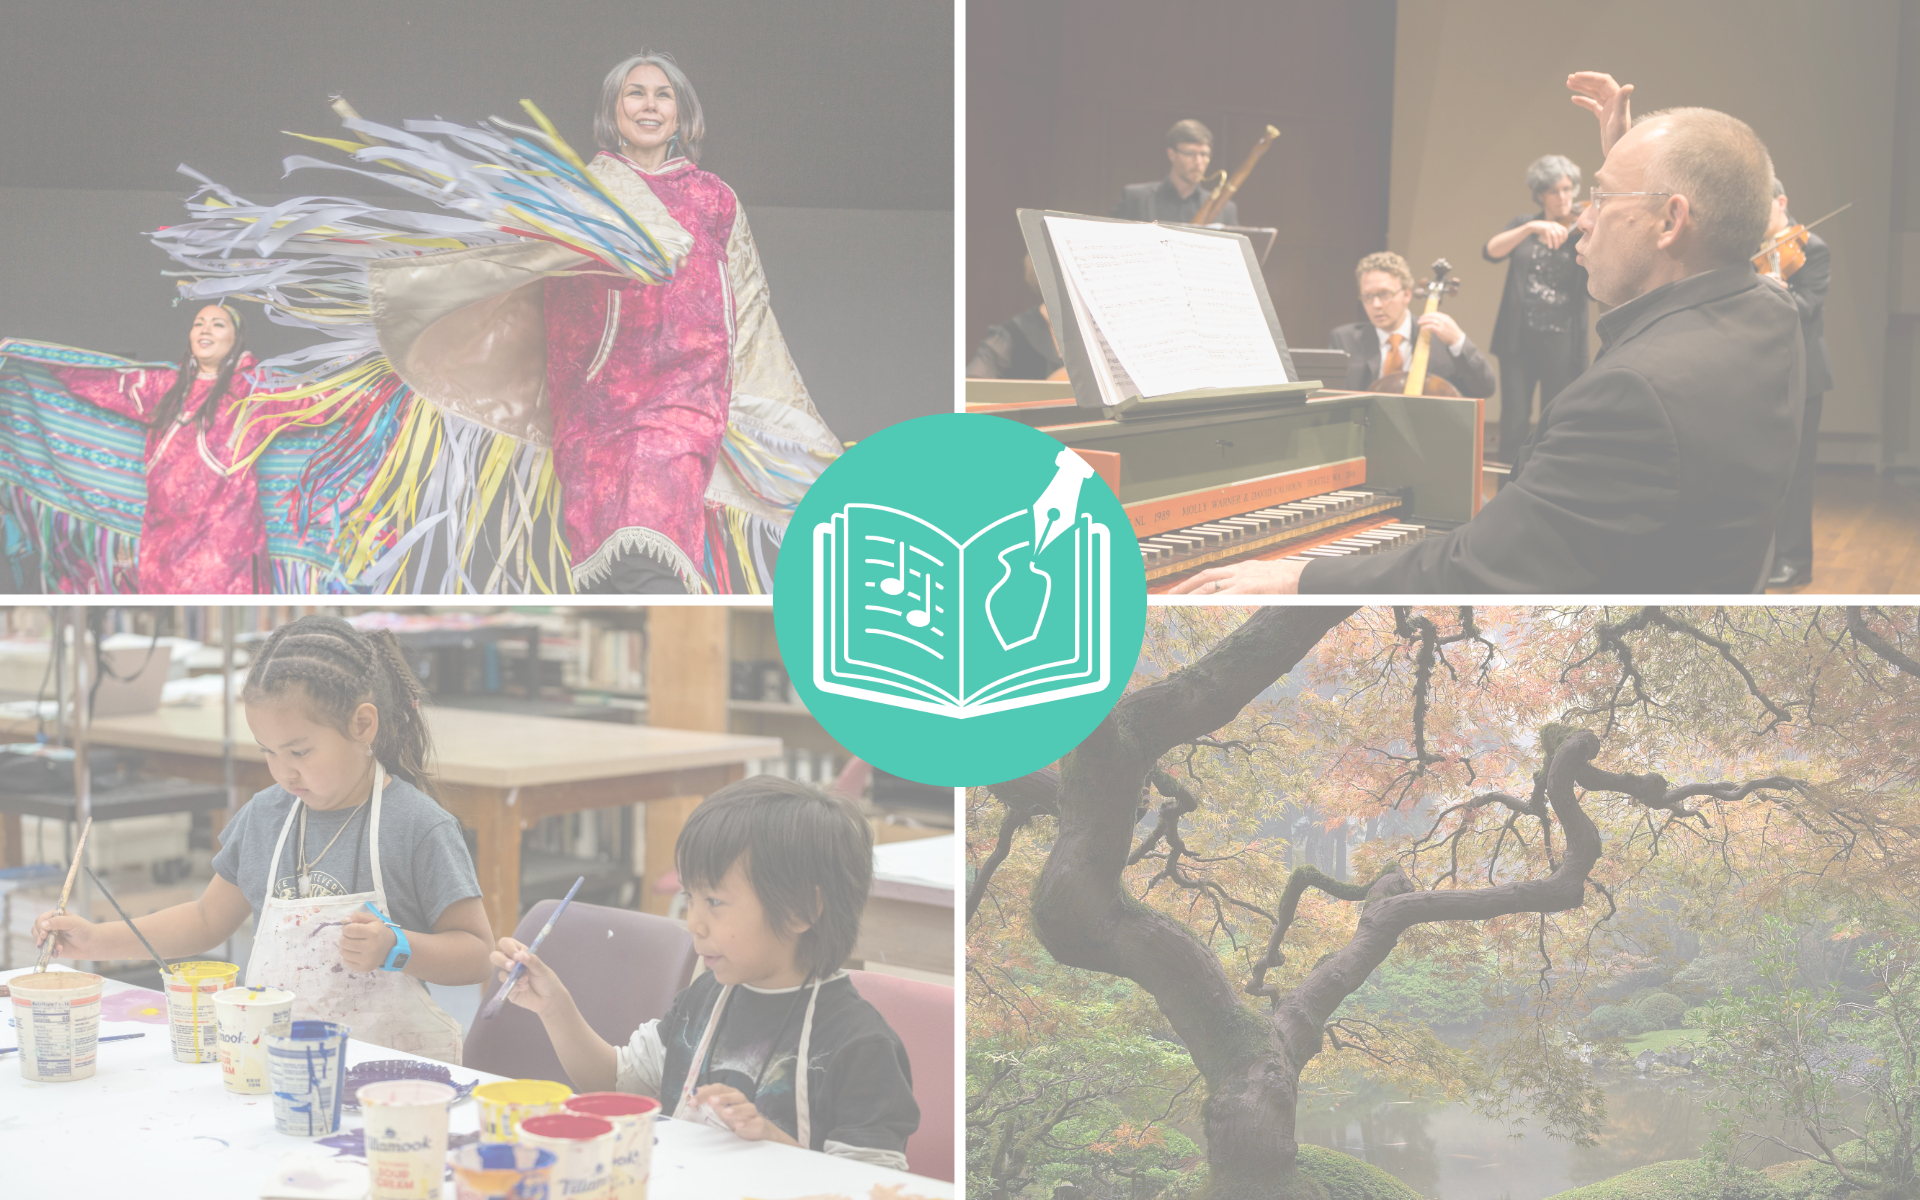 Top right: two female dancers at an Alaskan Fair; Top left: male piano player with other string musicians in the room; Bottom left: two children painting; Bottom right: Japanese tree in Japanese garden